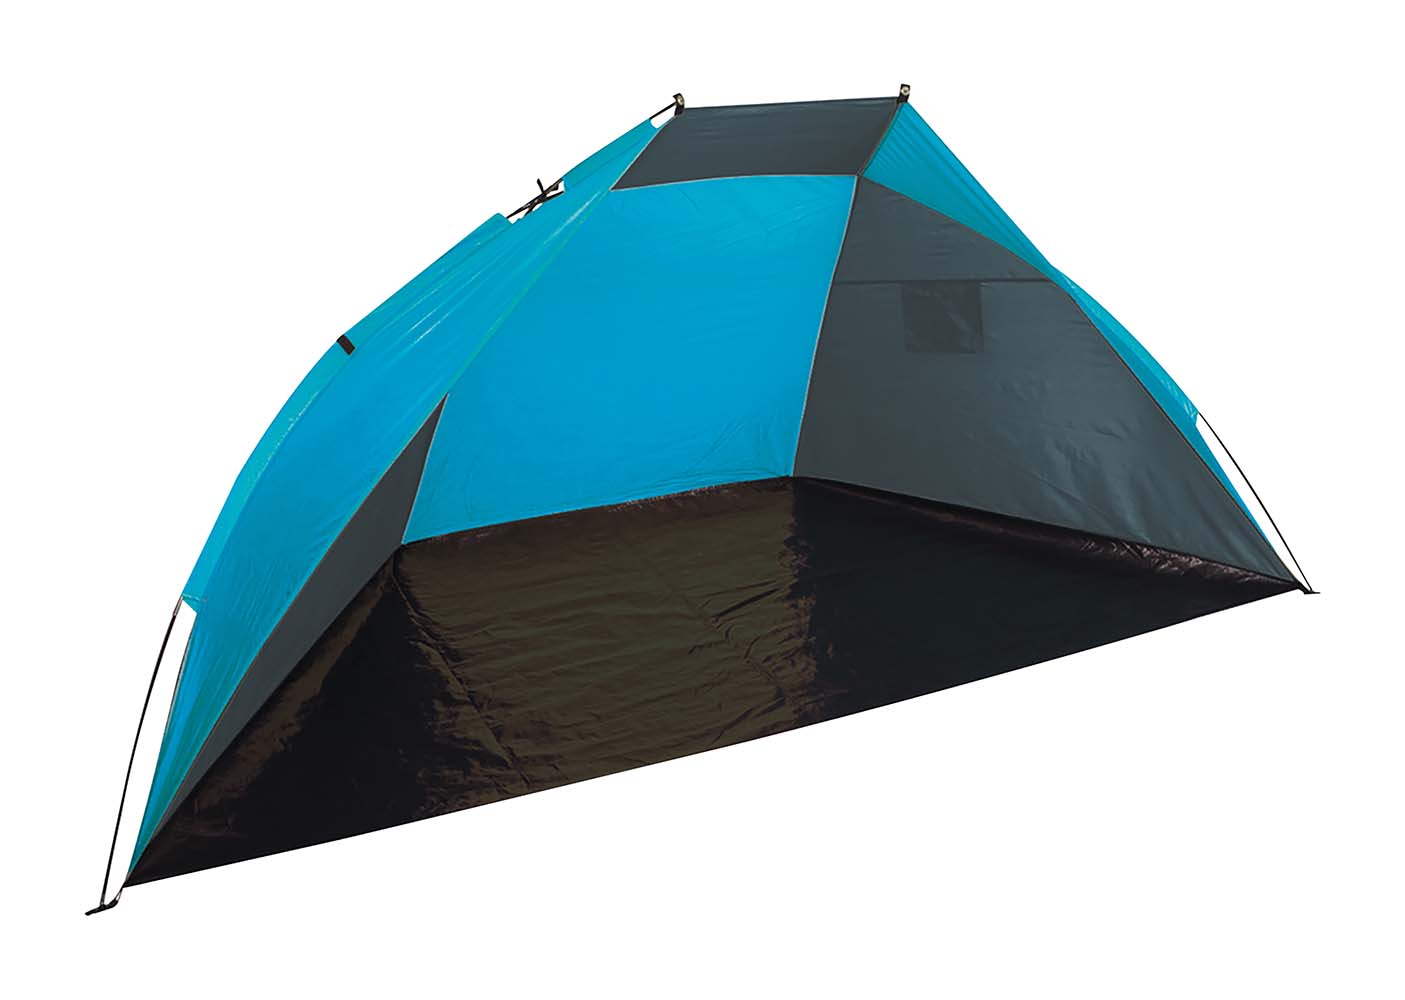 4367649 A compact folding wind shell with large dimensions. Easy to set up in any location. Easy to fold up compact, making it very portable. With a water proof PE ground sail. Supplied with fibre glass poles and pegs.